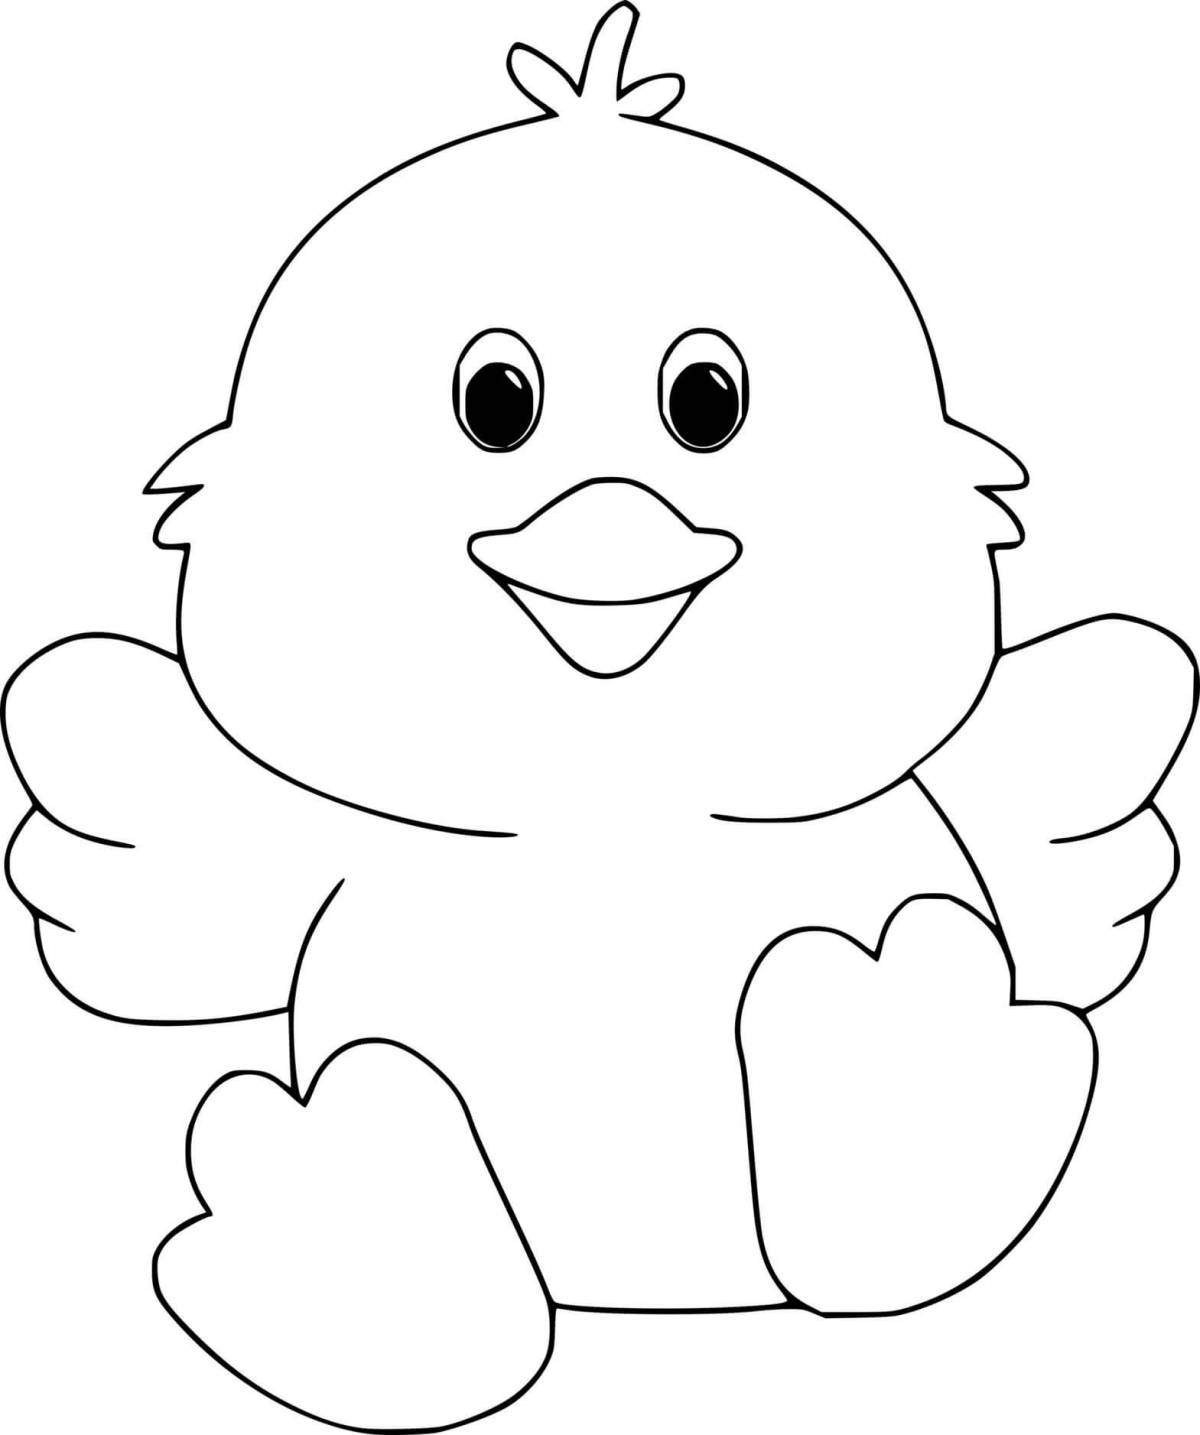 Fluffy chick coloring page